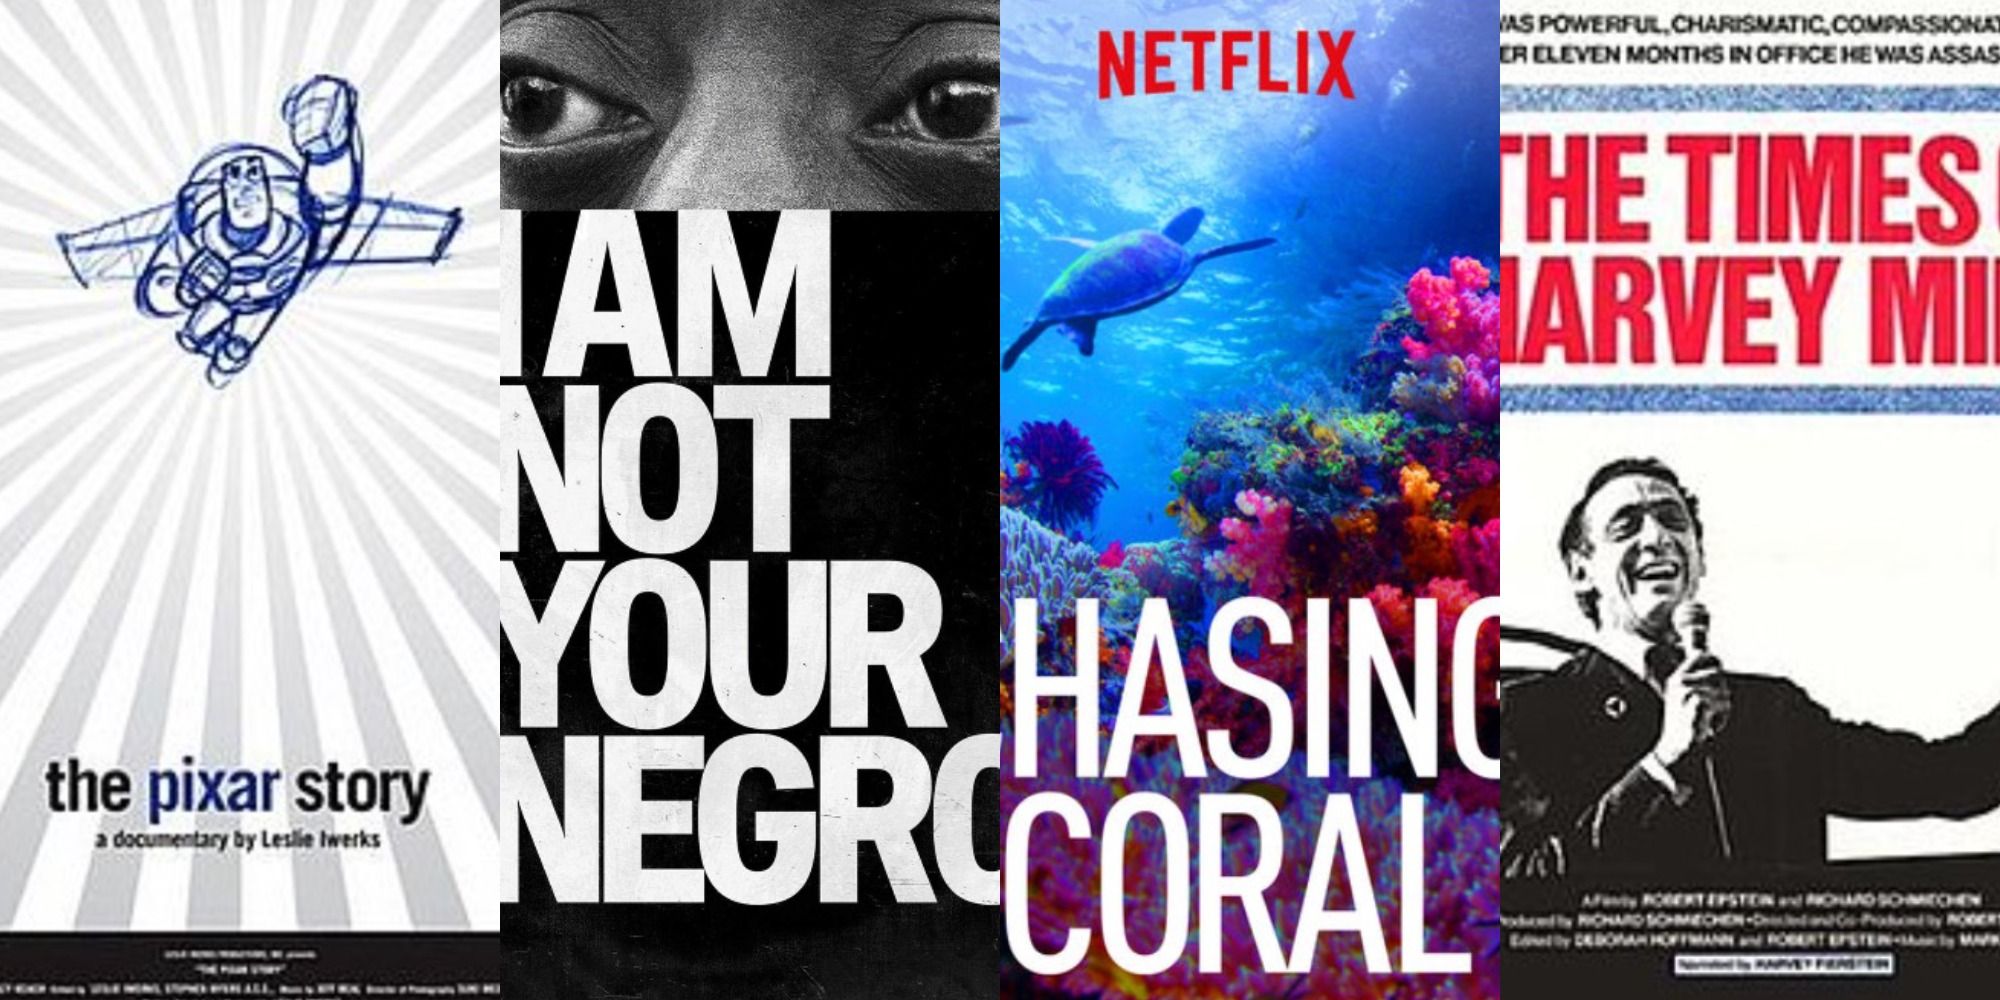 A collage of the posters for The Pixar Story, I Am Not Your Negro, Chasing Coral and The Times of Harvey Milk